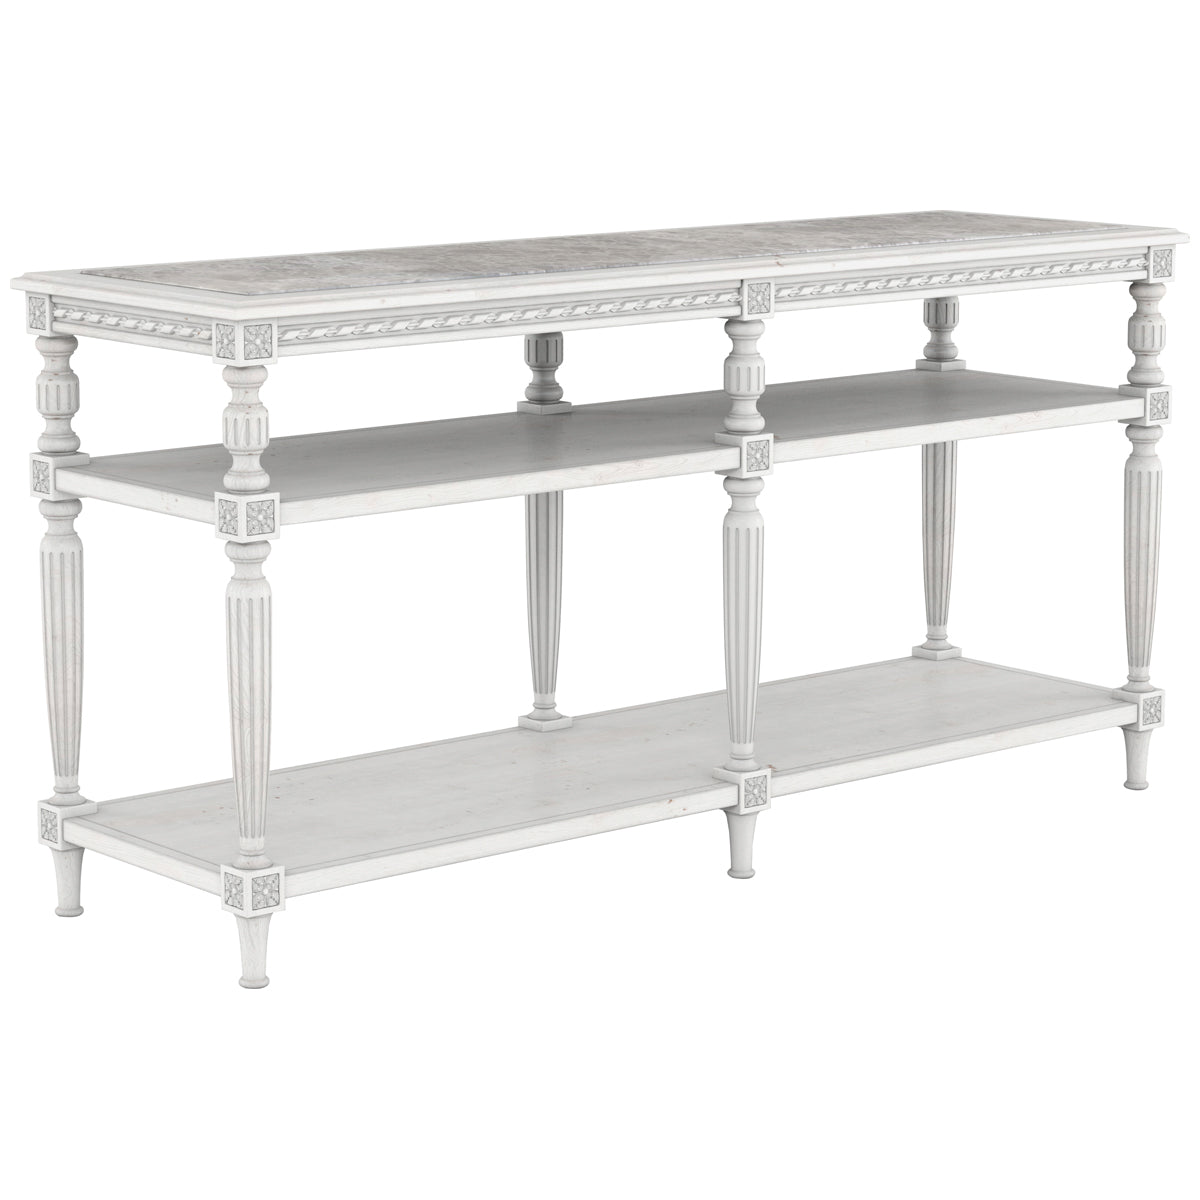 A.R.T. Furniture Somerton Sofa Table, Stone Top